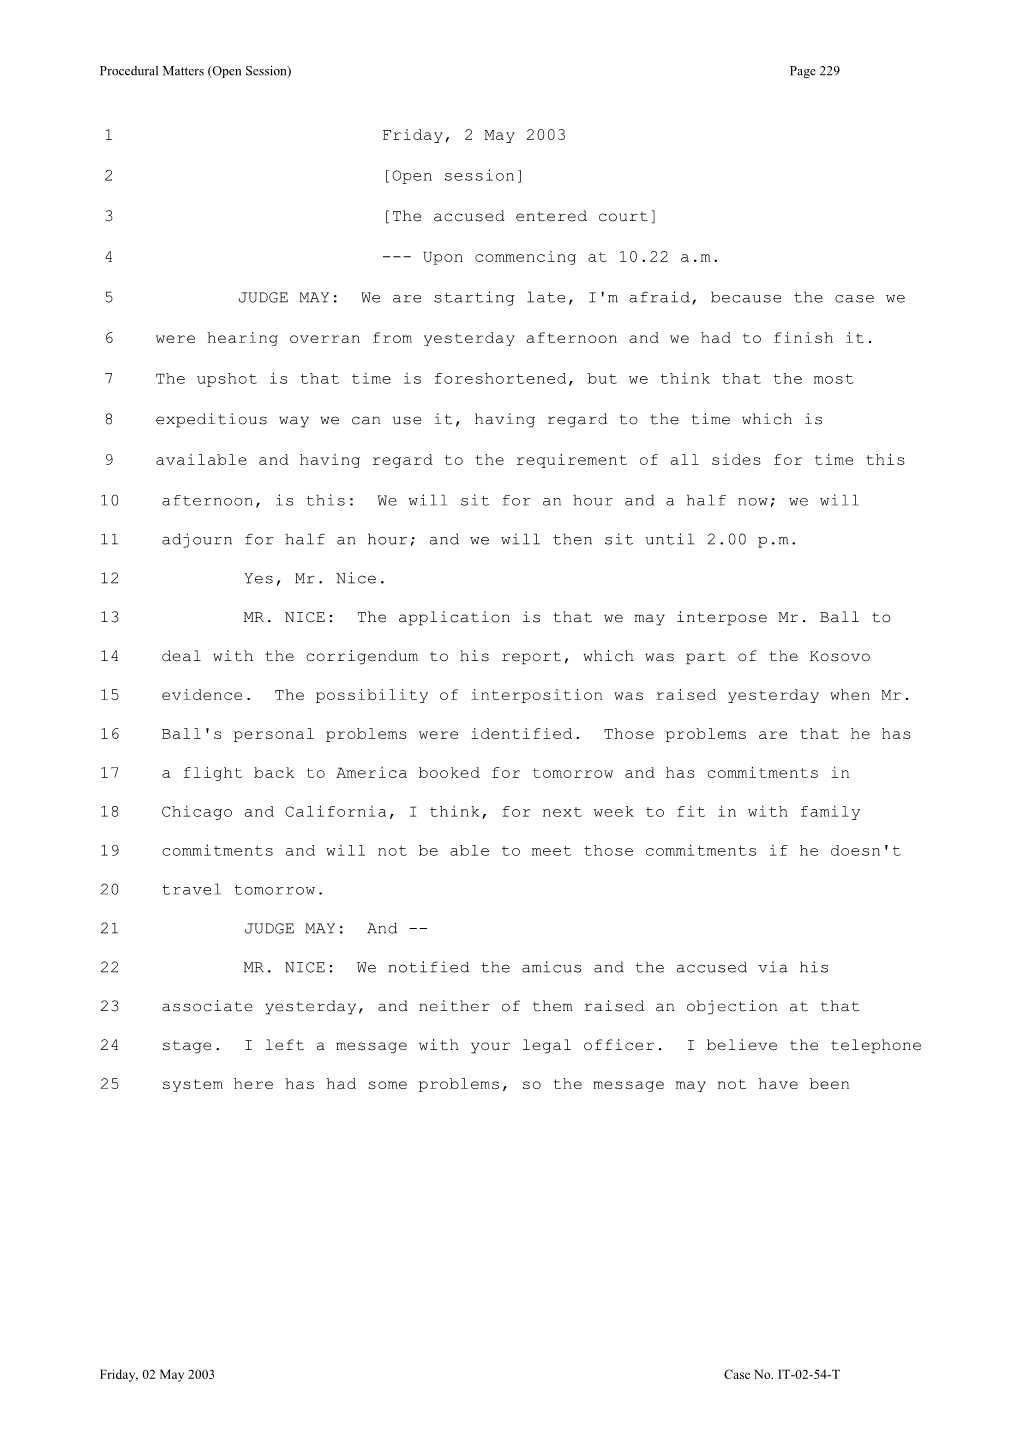 Procedural Matters (Open Session) Page 19941